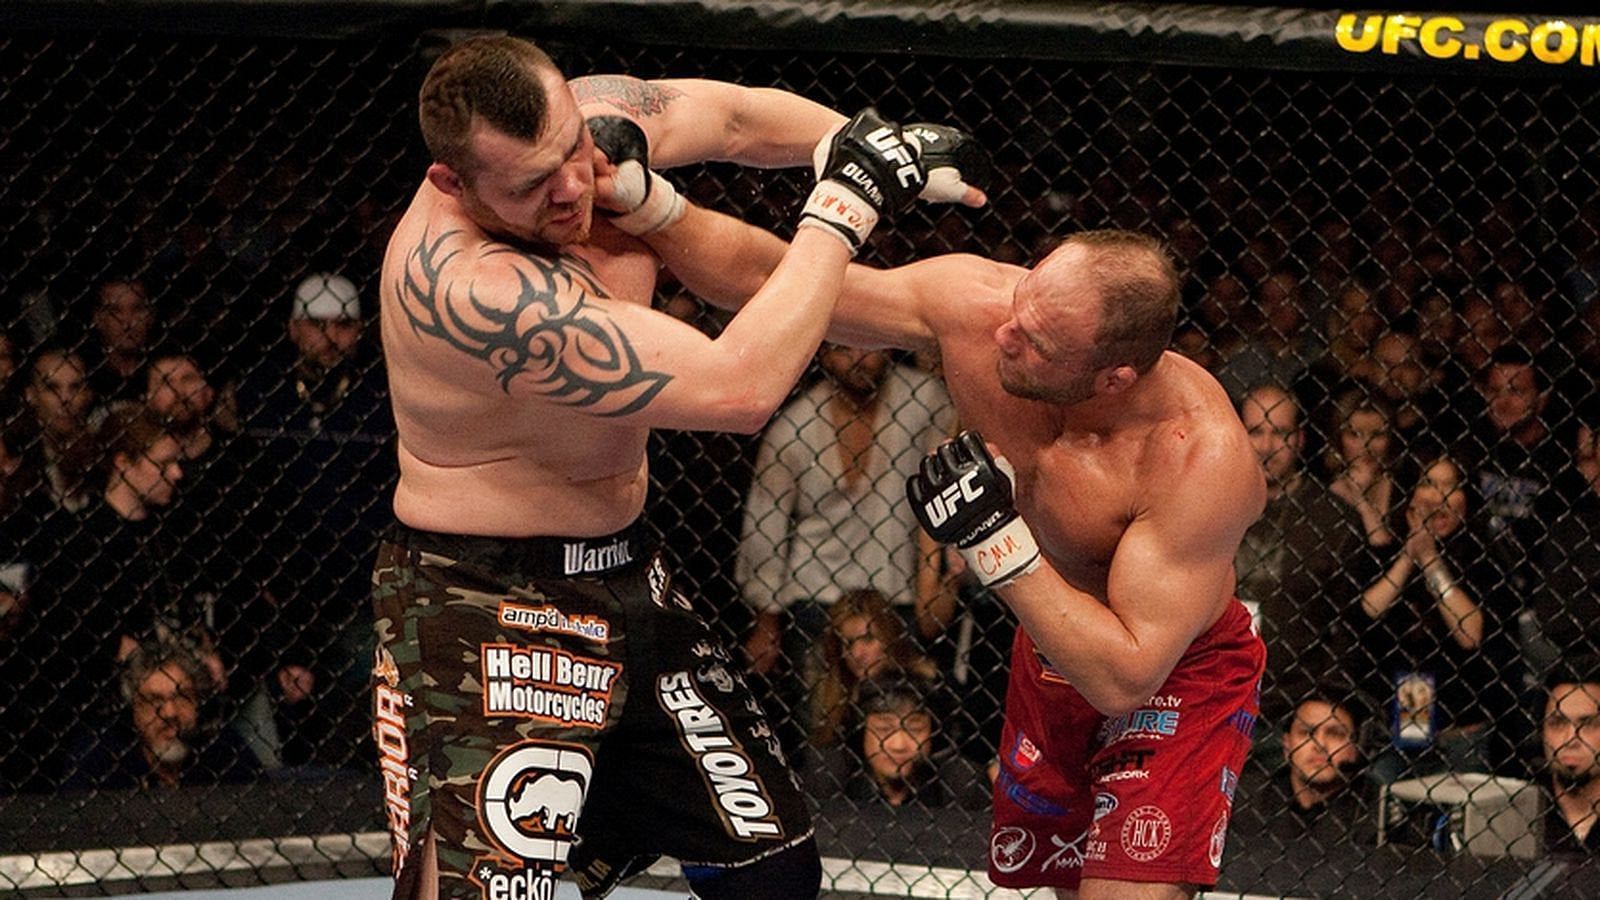 Randy Couture&#039;s chances of beating Tim Sylvia at the age of 43 were firmly written off by many fans